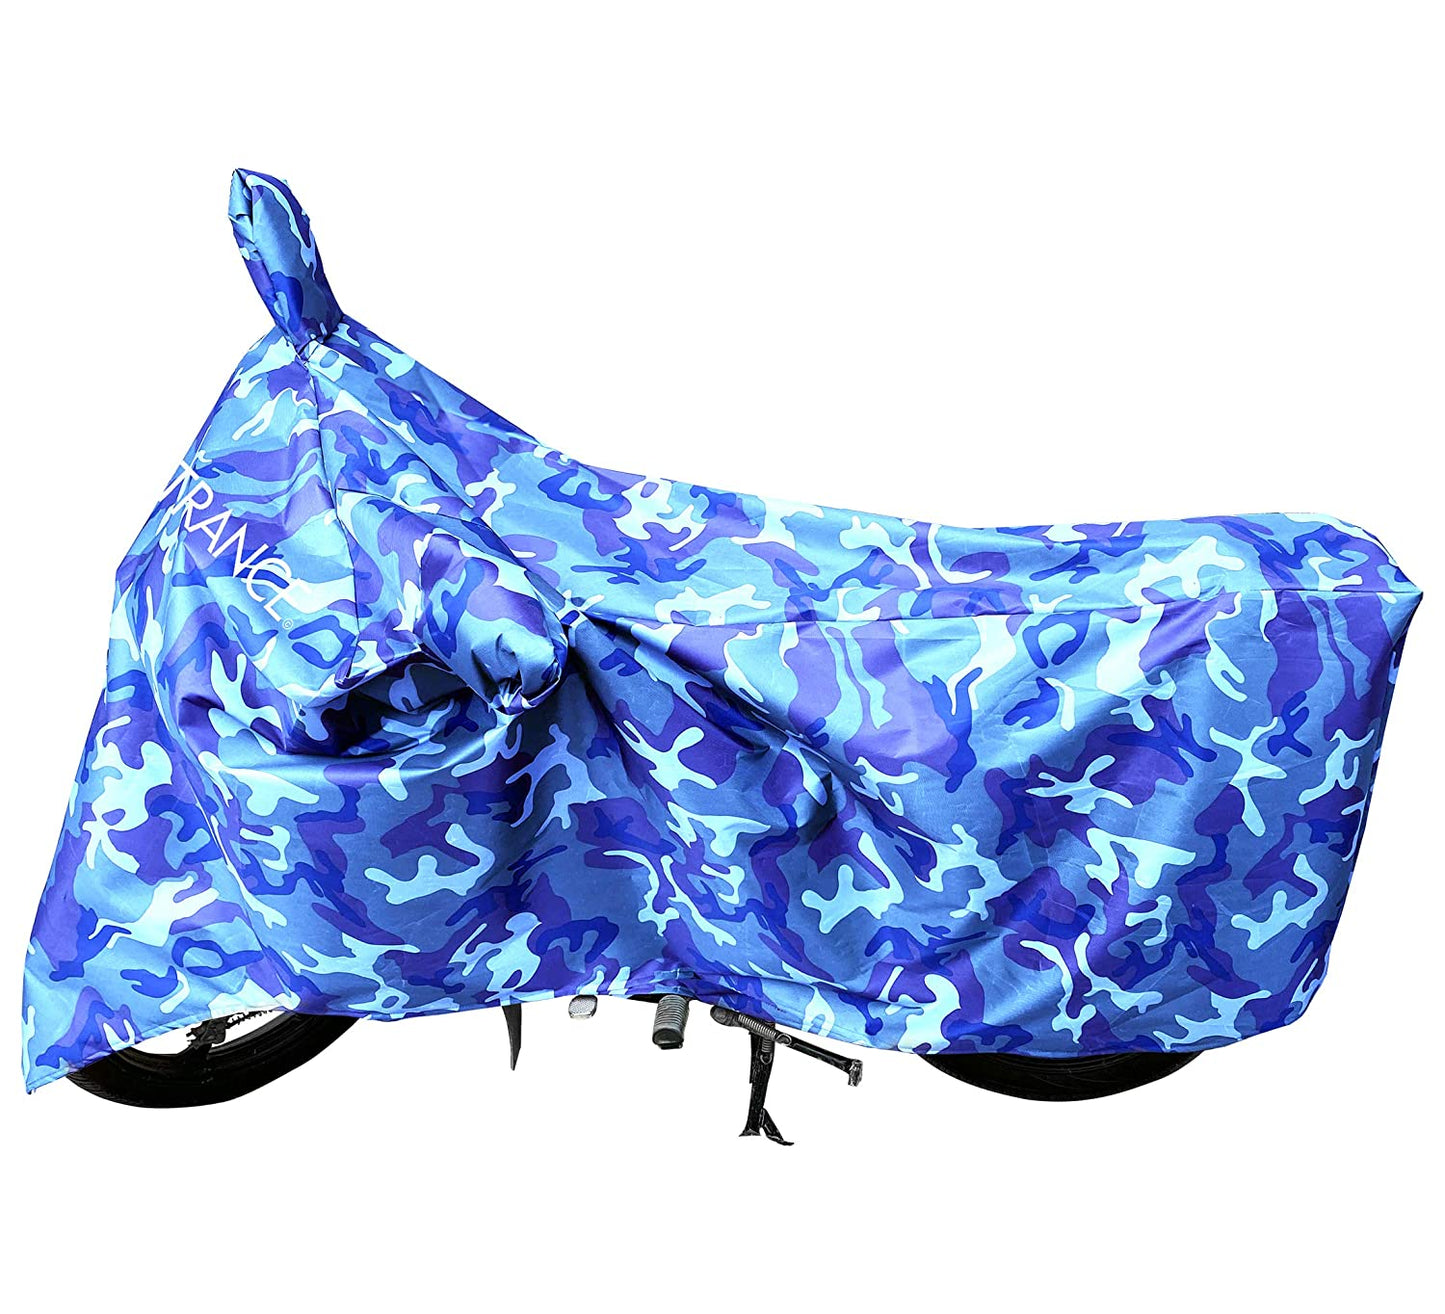 MotoTrance Jungle Bike Body Covers For Honda CBR 650F - Interlock-Stitched Waterproof and Heat Resistant with Mirror Pockets